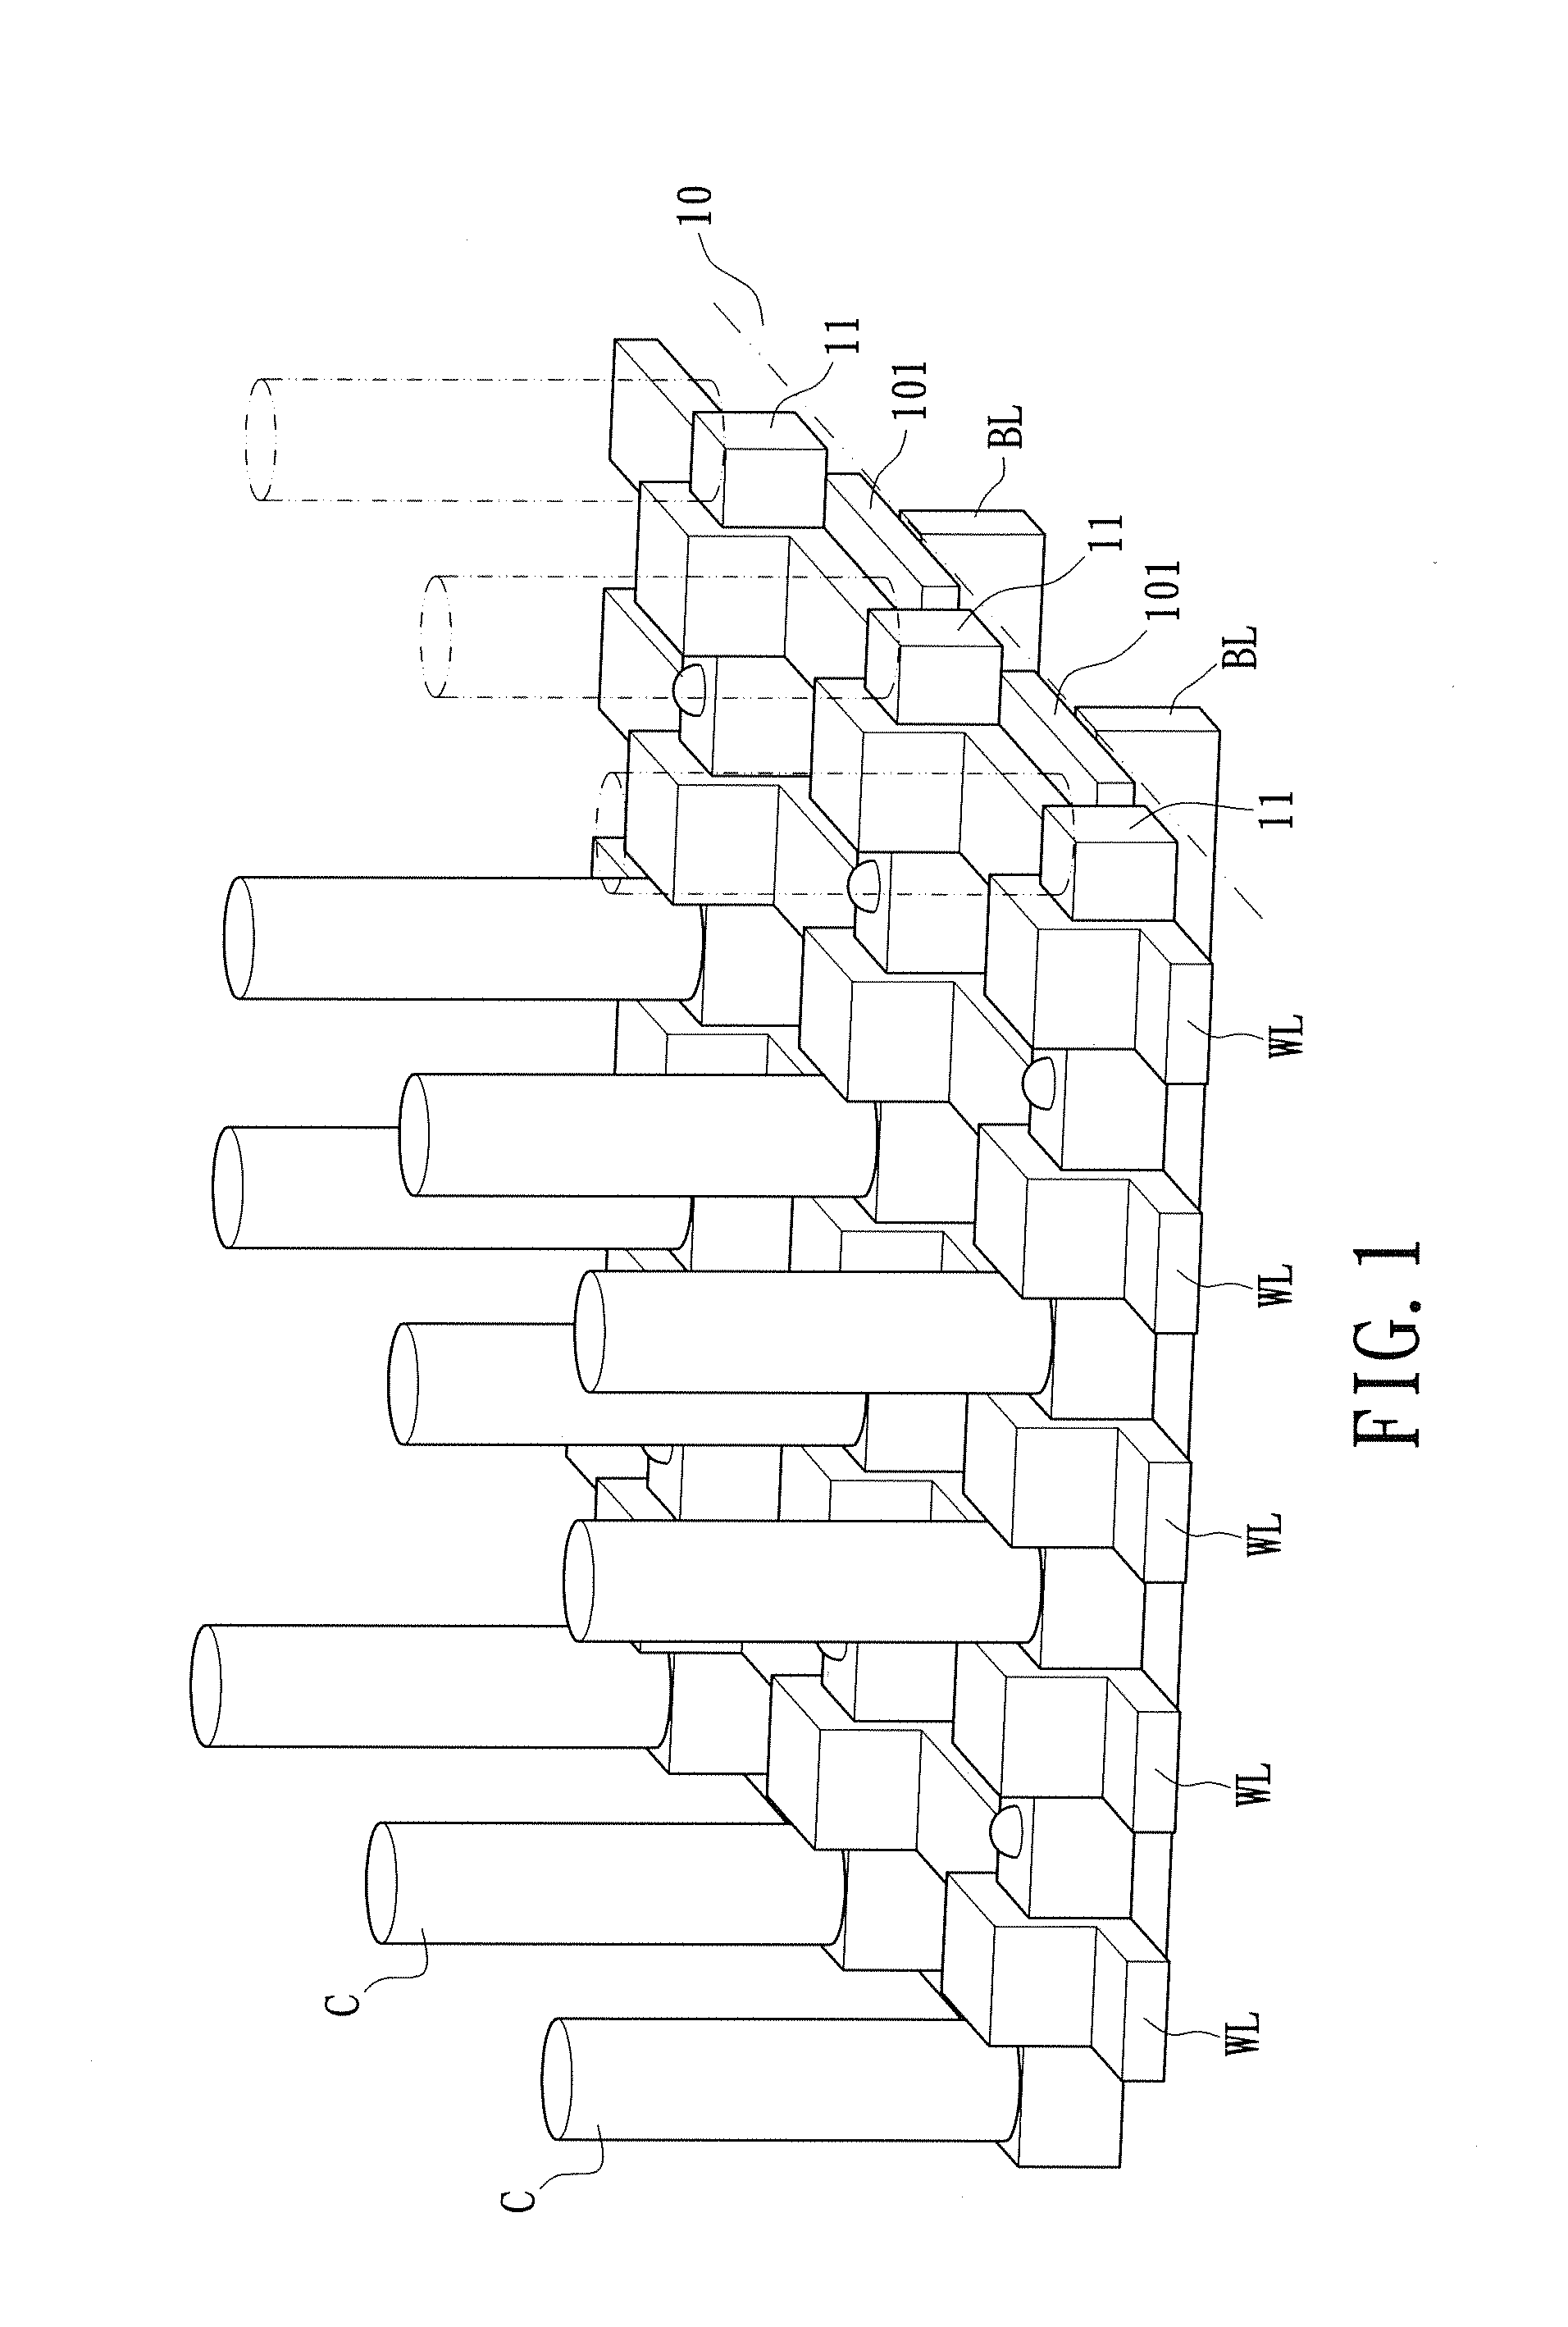 Dram cell having buried bit line and manufacturing method thereof